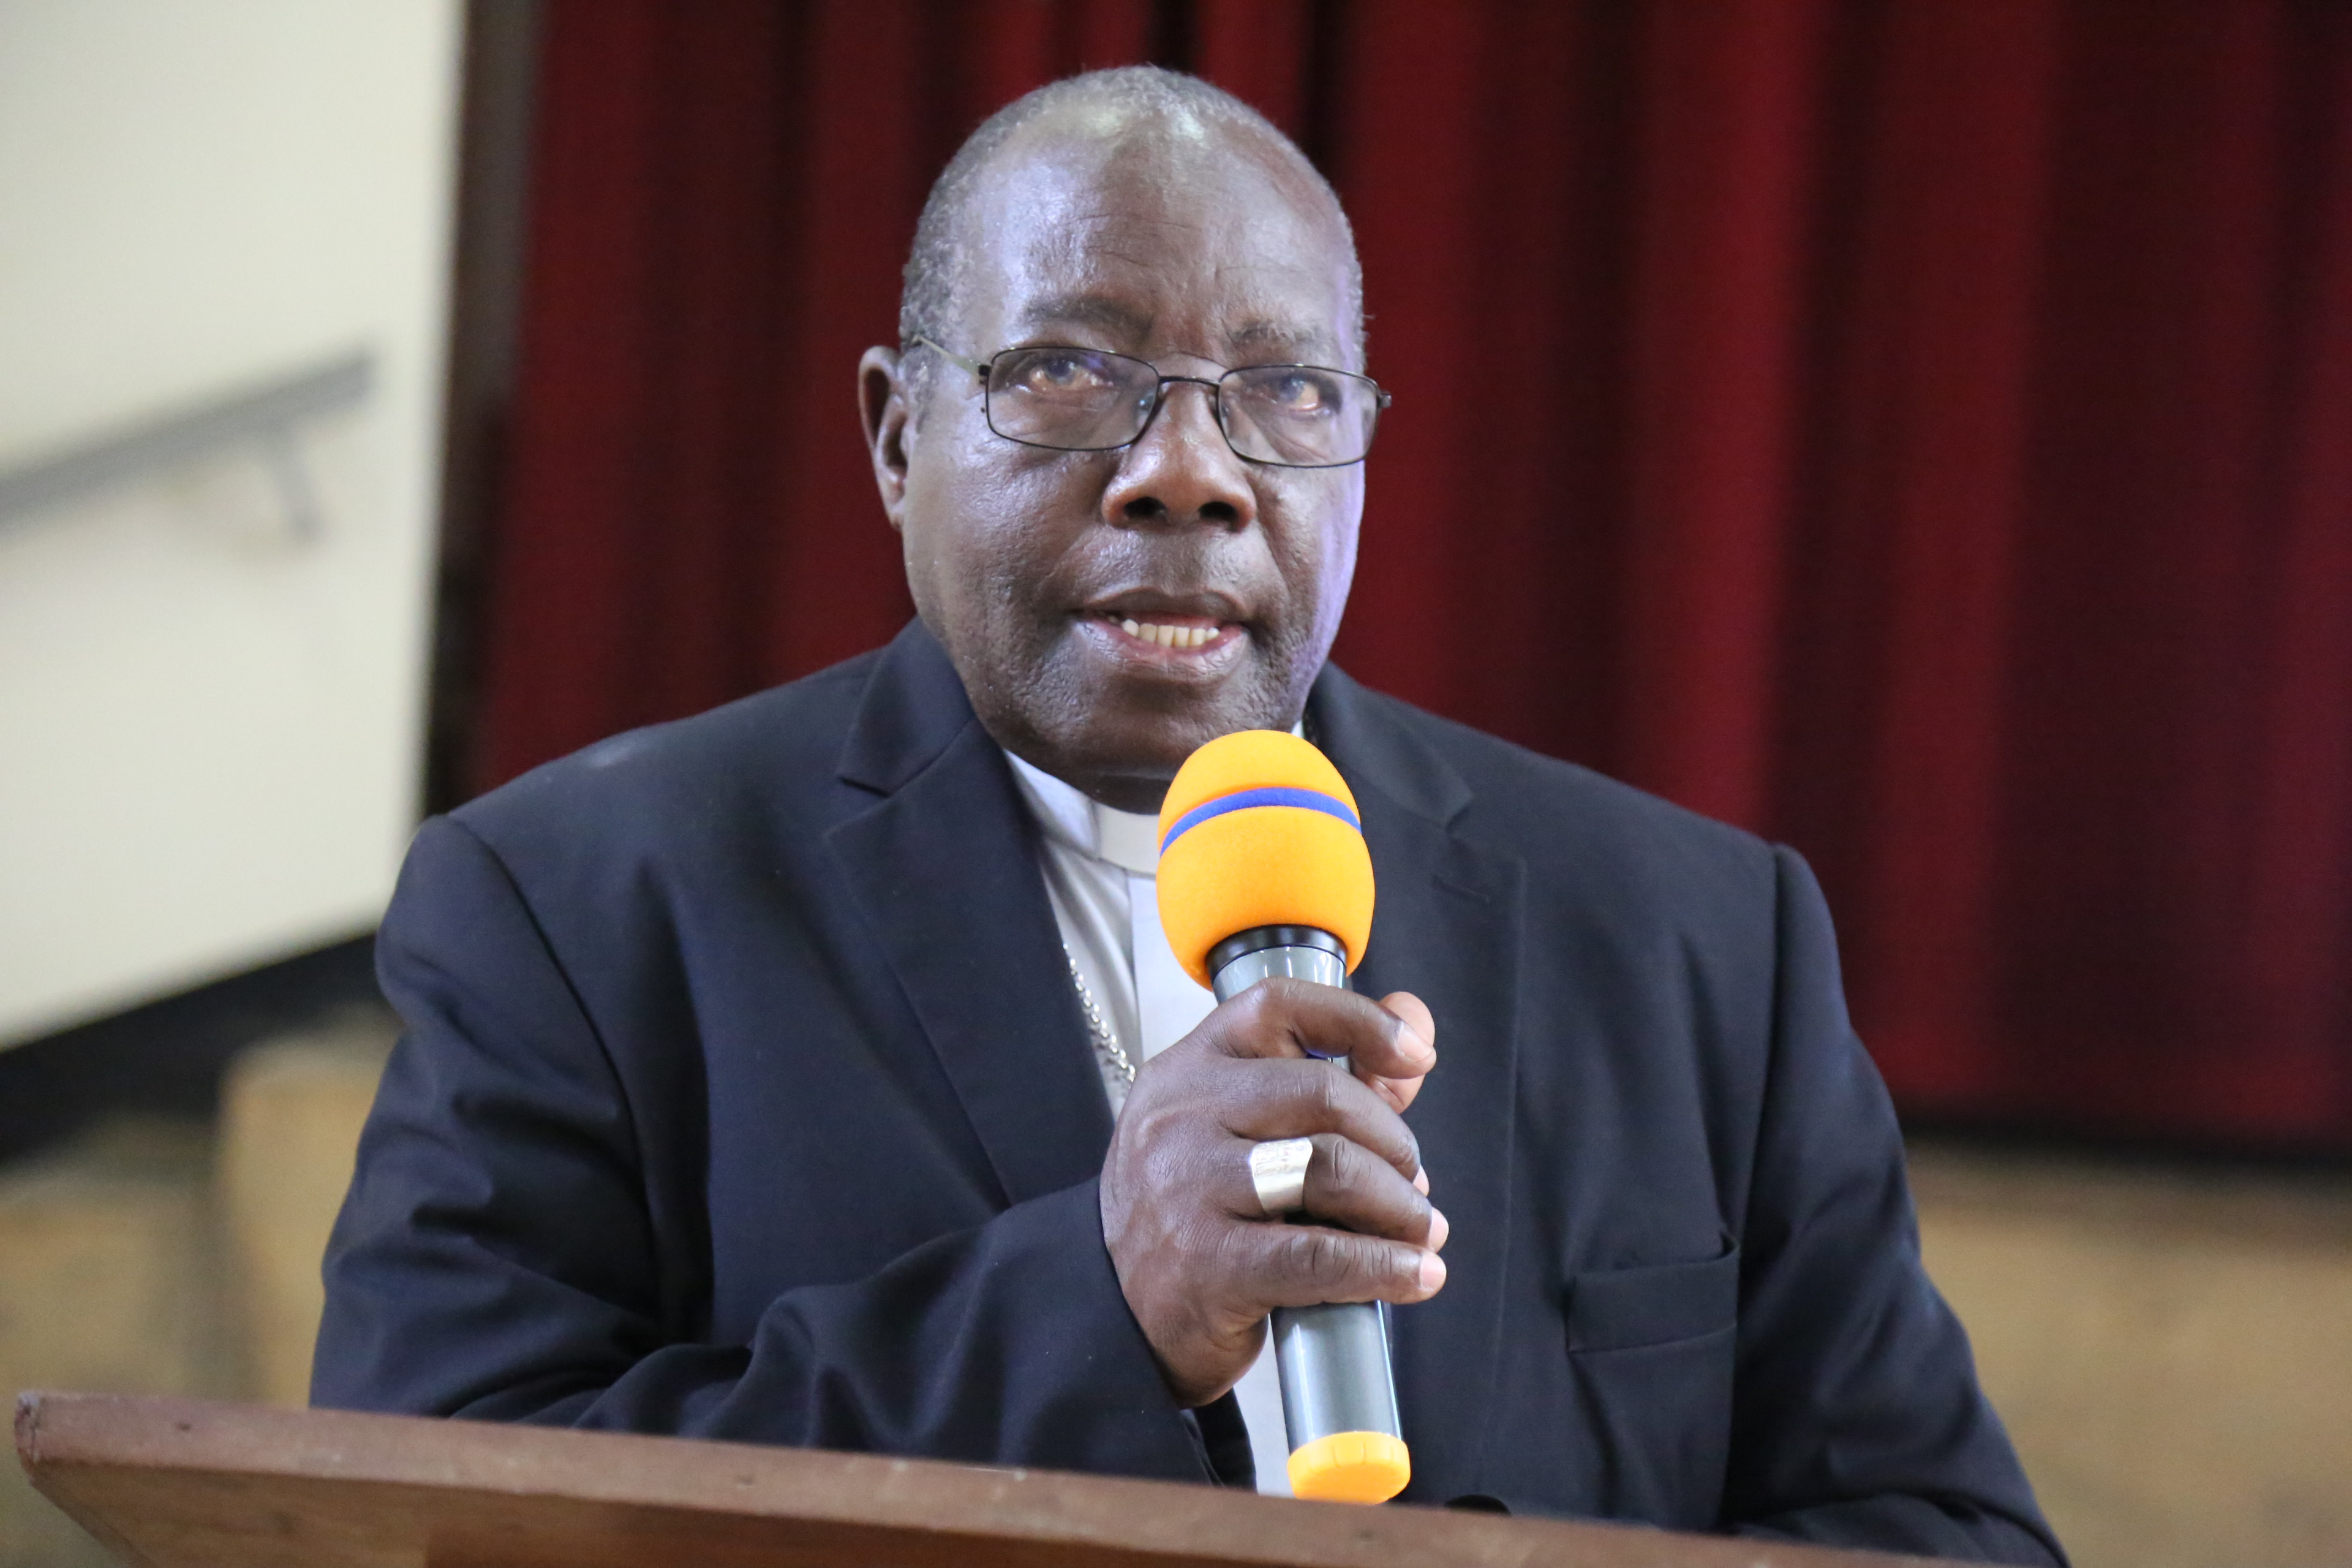 Rt. Rev. John Kaggwa, Bishop of Masaka Diocese  who was the chief guest at the function  delivering his speech